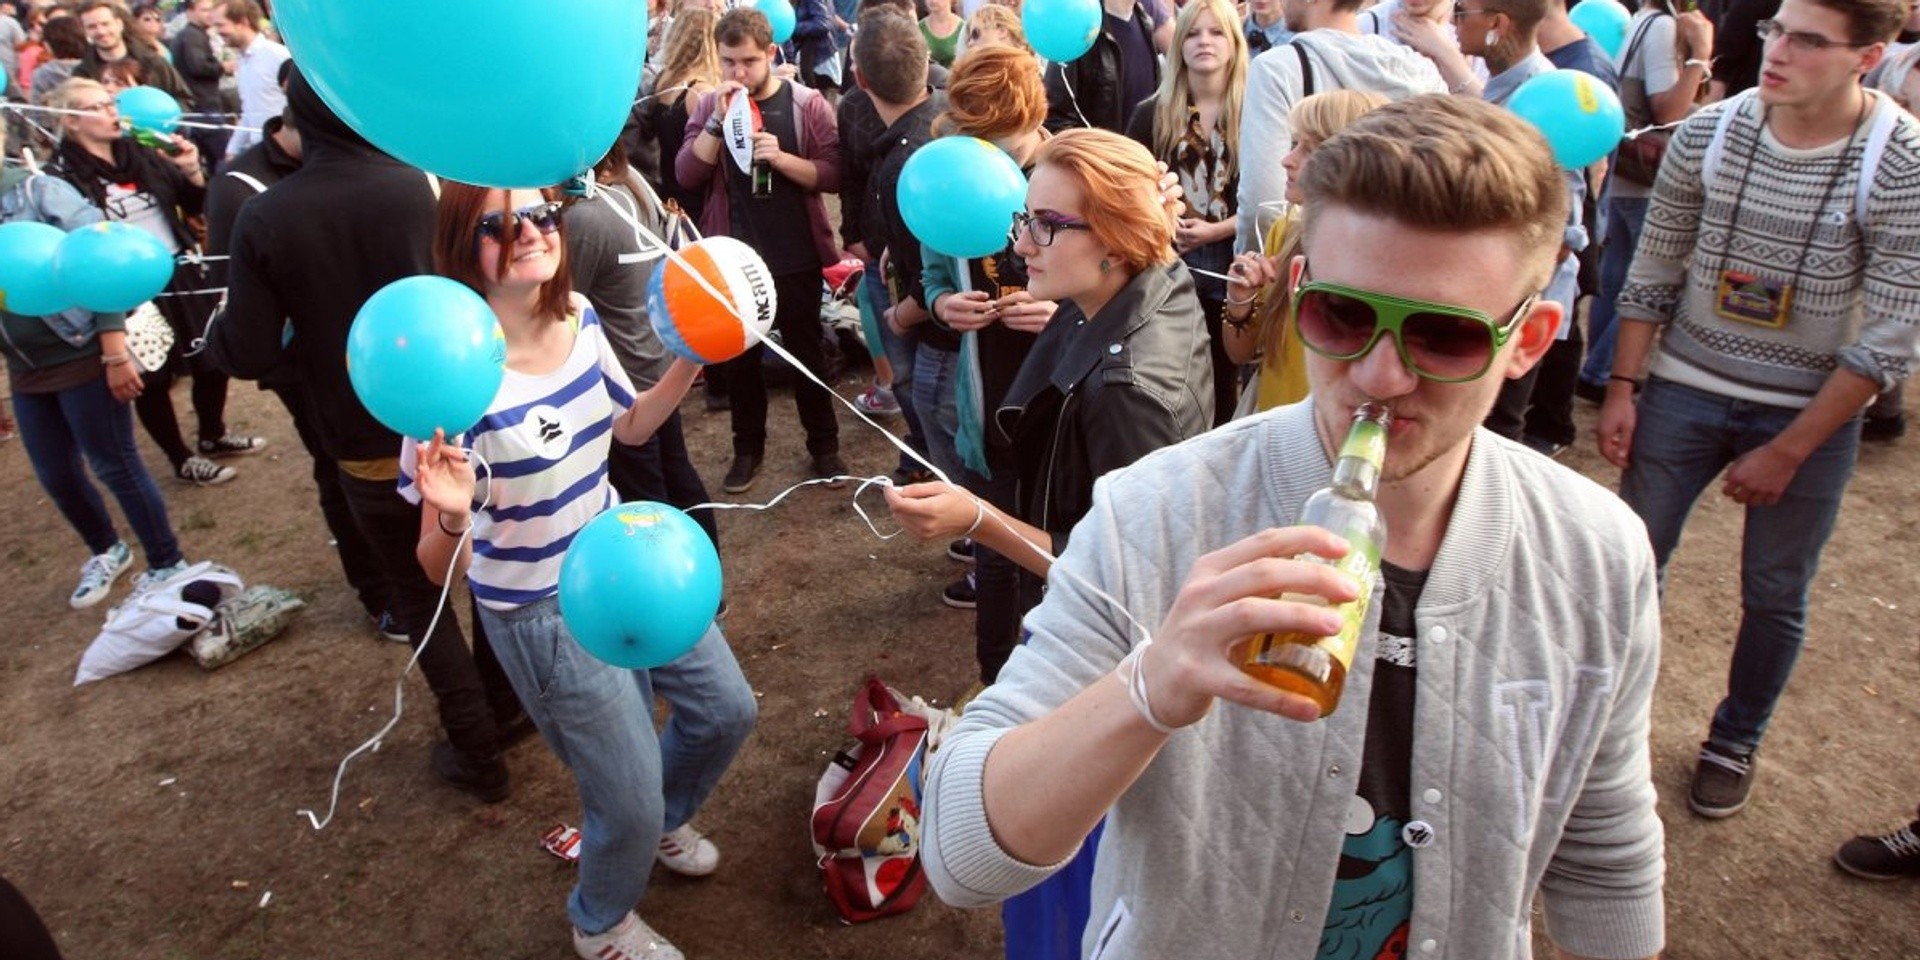 There's a new festival called Hipster Festival